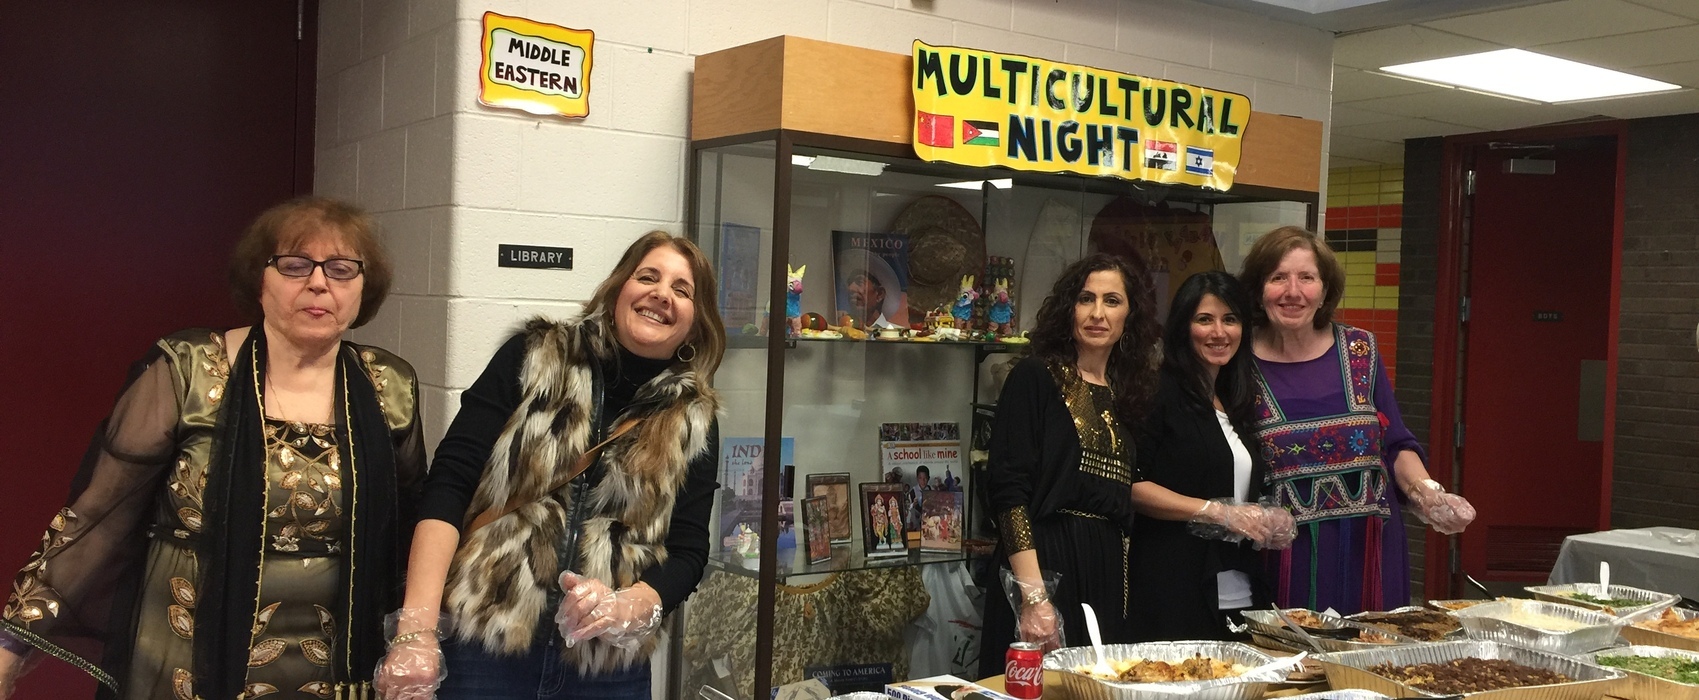 Parents, volunteers, and staff participate in Multicultural Night activities.